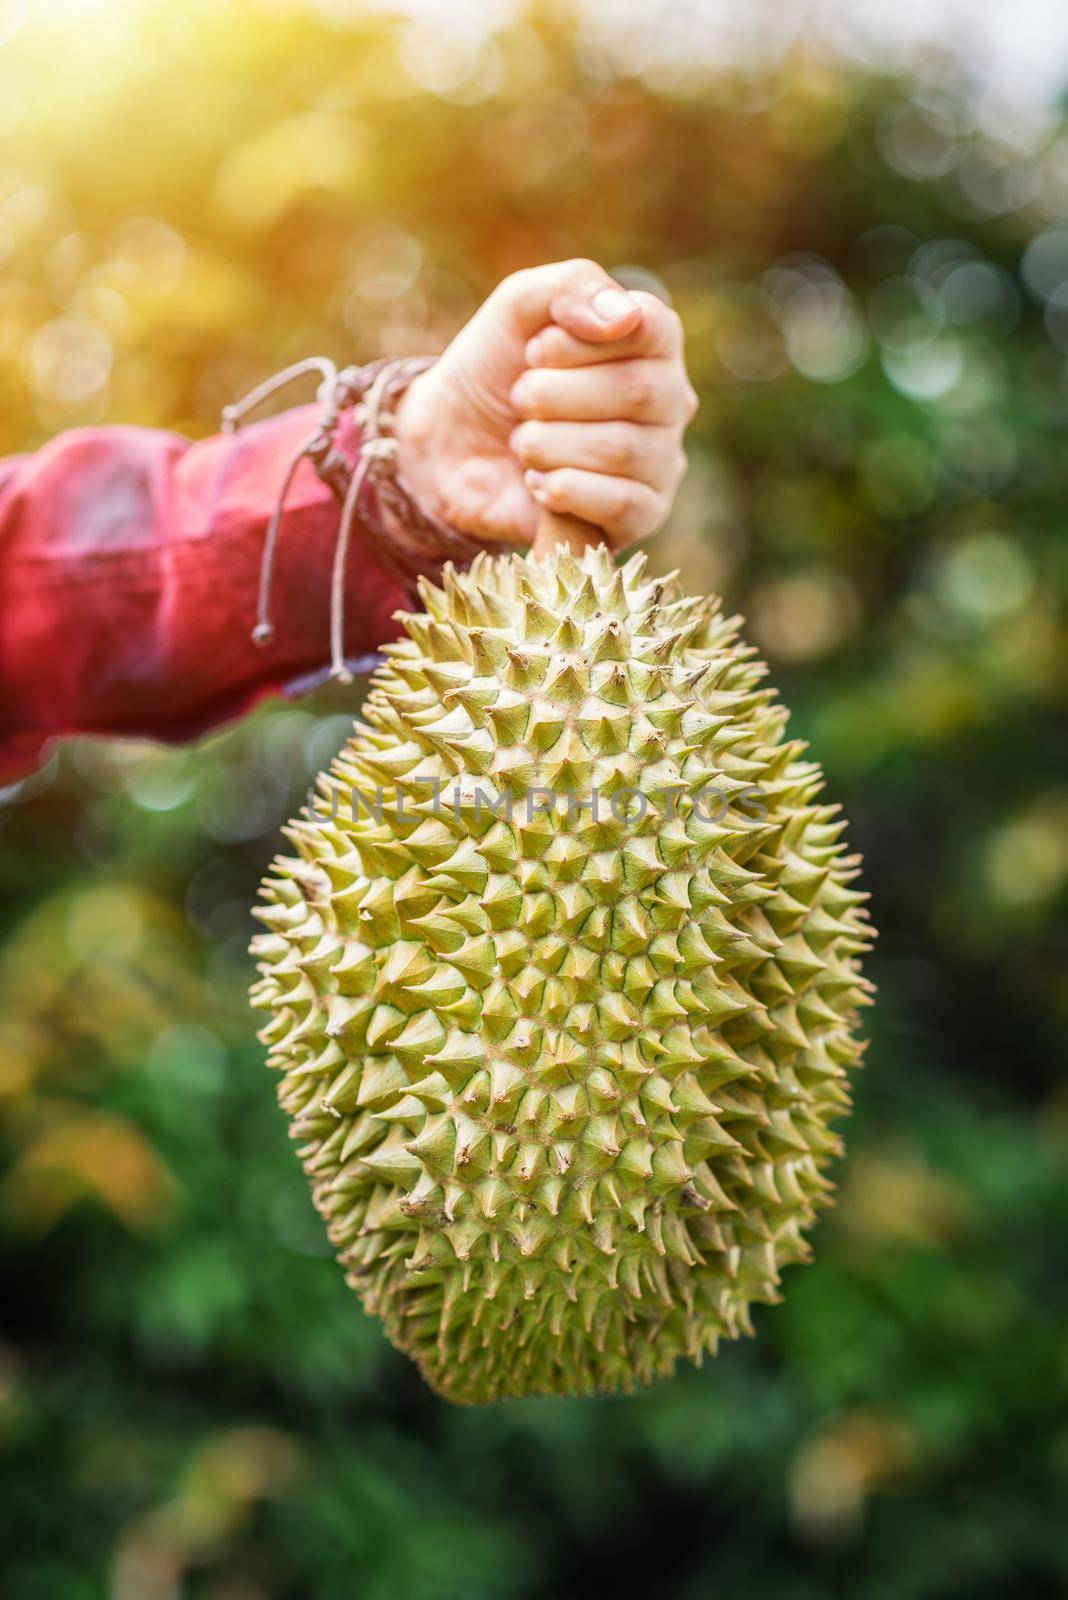 Mon Thong durian fruit in hand by norgal